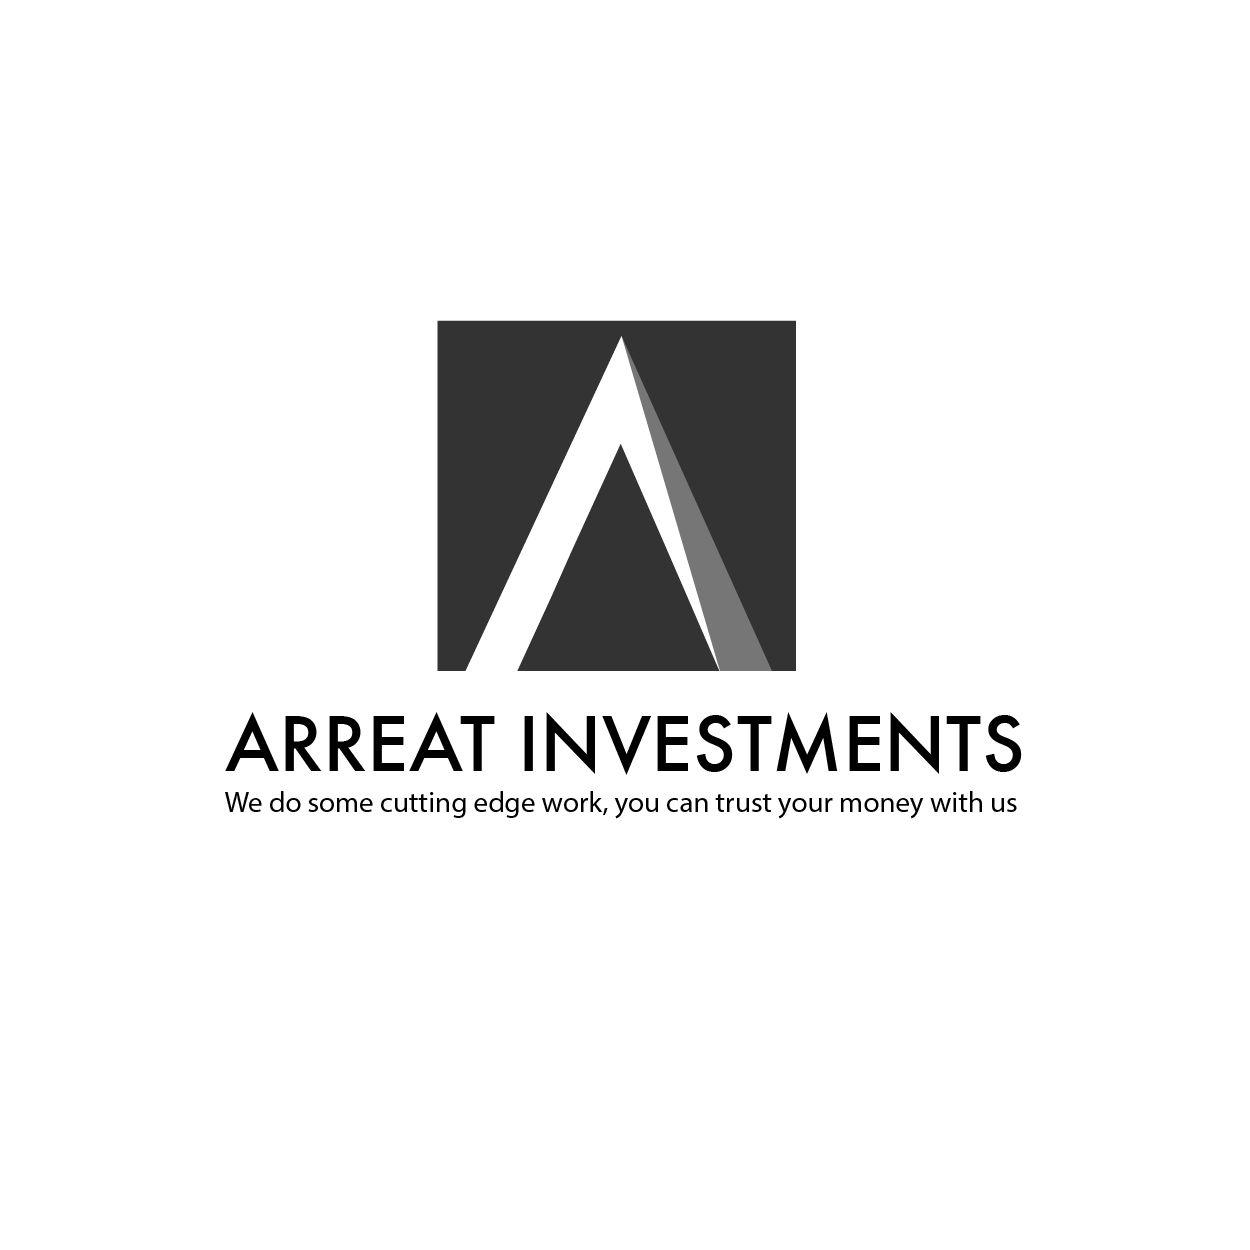 U. S. Invesments Company Logo - Serious, Modern, It Company Logo Design for Arreat Investments or